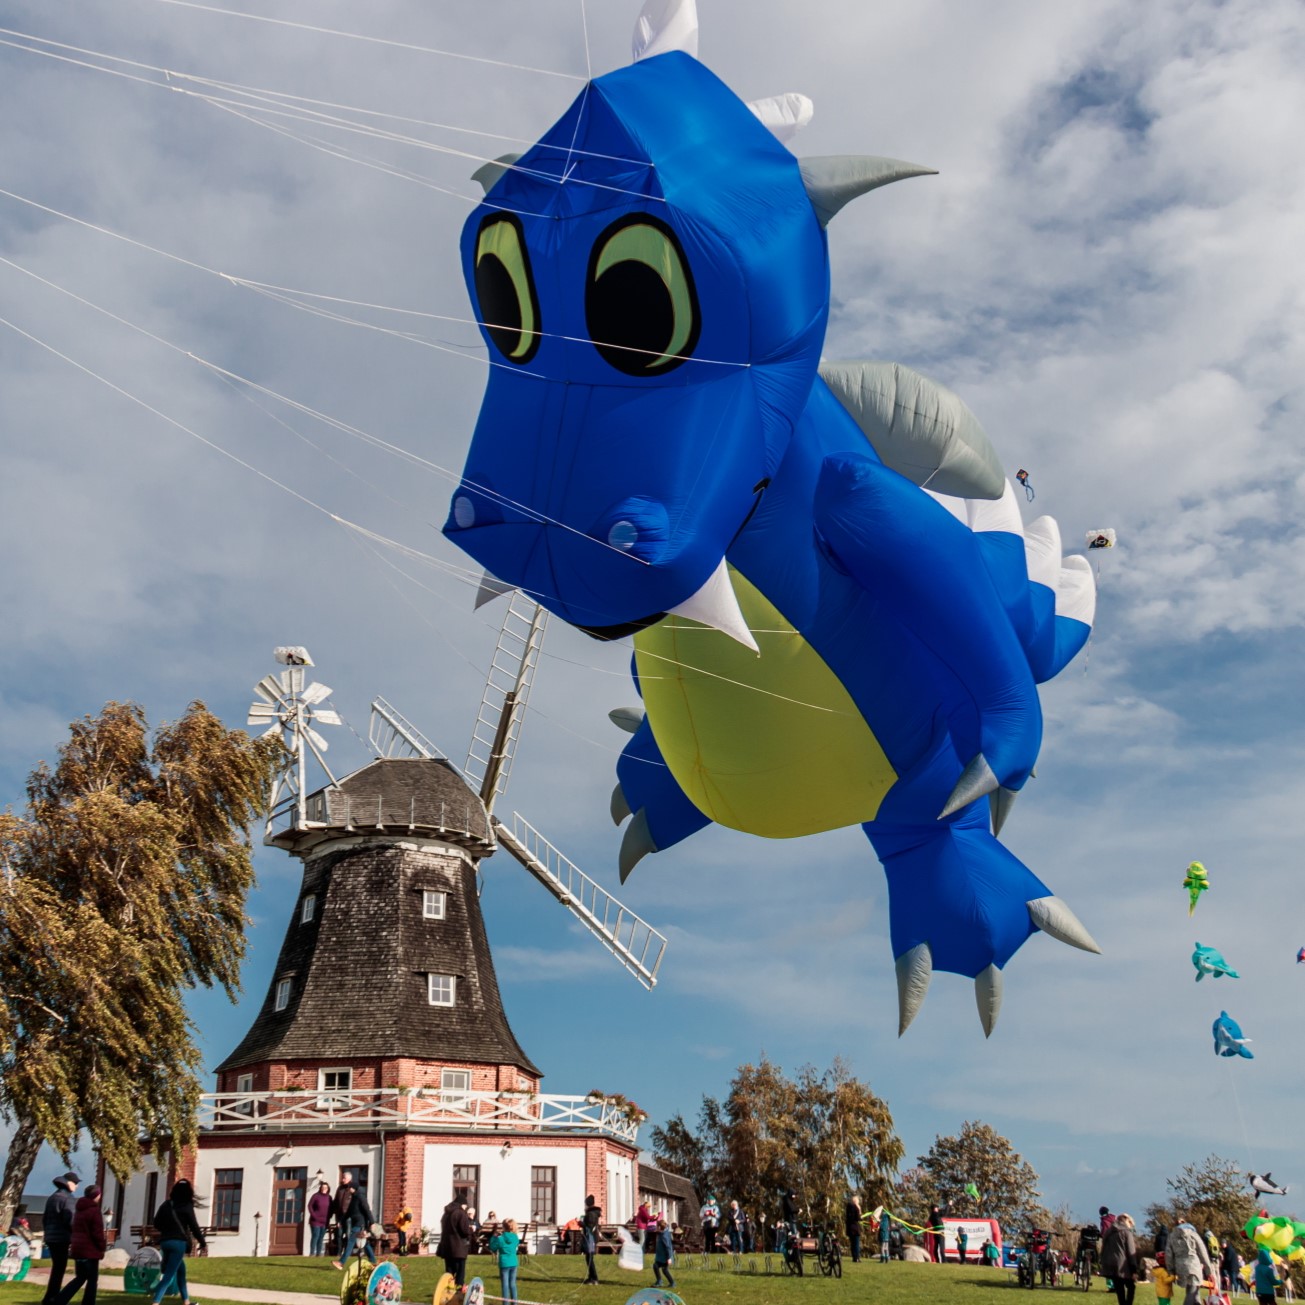 A large blue flying kite hovers over the Klützer Mühle, which can be seen in the background.